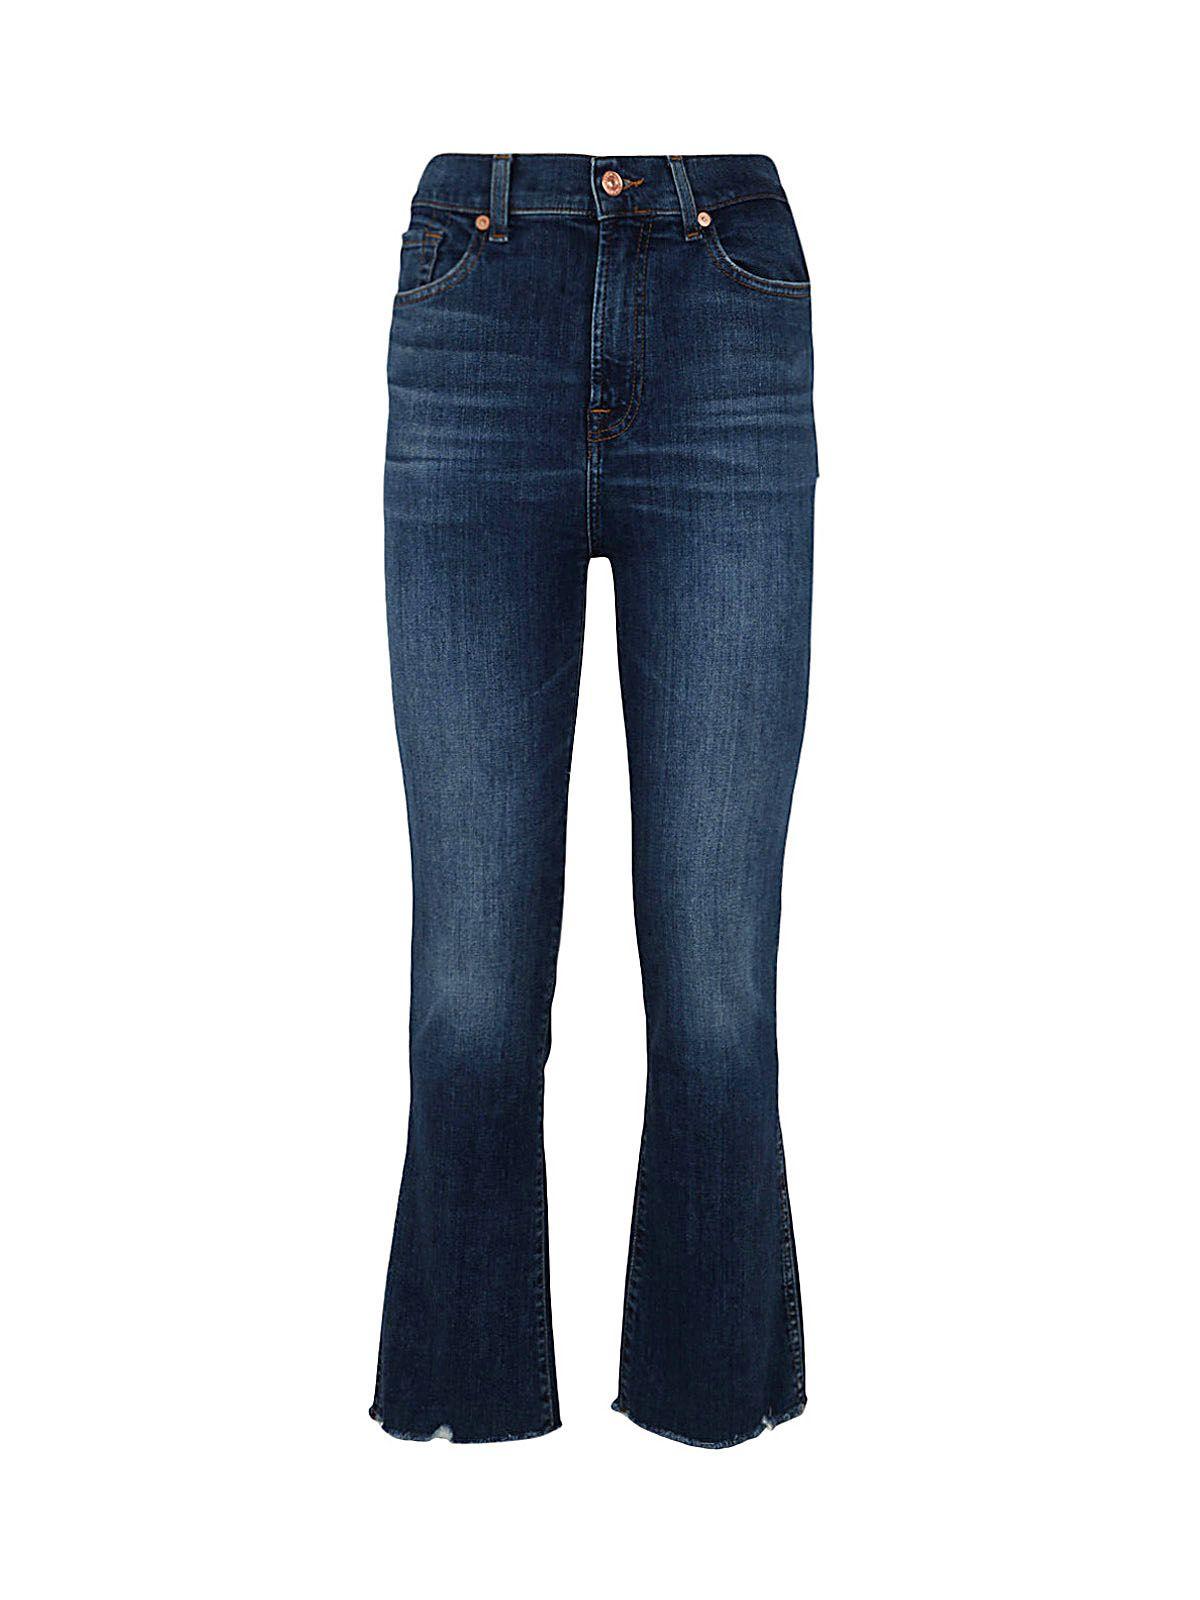 7 For All Mankind Baumwolle Andere materialien jeans in Blau Damen Jeans 7 For All Mankind Jeans 